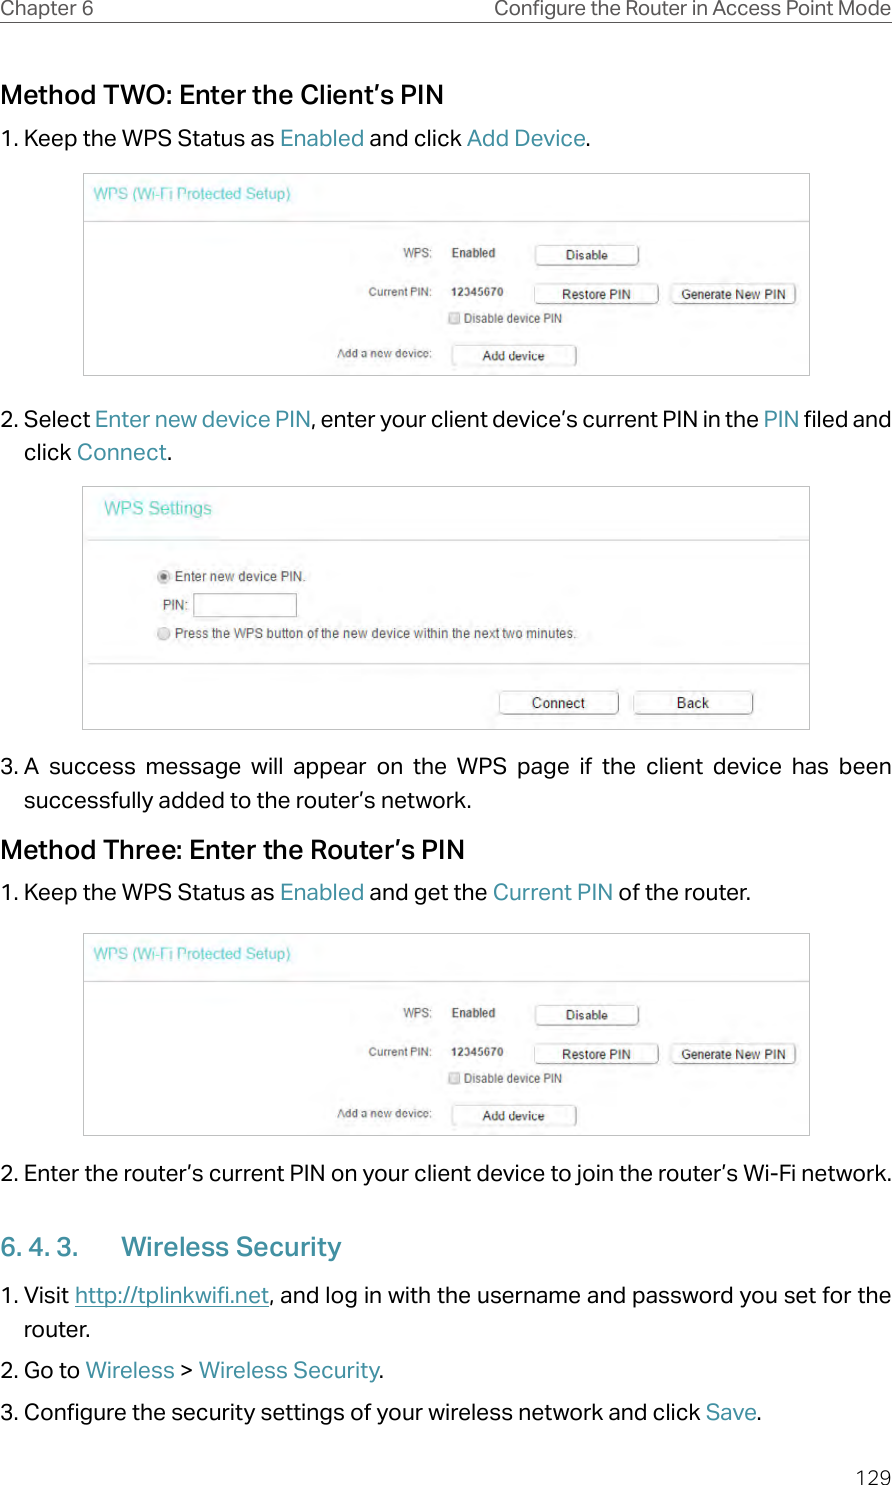 129Chapter 6 Congure the Router in Access Point ModeMethod TWO: Enter the Client’s PIN1. Keep the WPS Status as Enabled and click Add Device.2. Select Enter new device PIN, enter your client device’s current PIN in the PIN filed and click Connect.3. A success message will appear on the WPS page if the client device has been successfully added to the router’s network.Method Three: Enter the Router’s PIN1. Keep the WPS Status as Enabled and get the Current PIN of the router.2. Enter the router’s current PIN on your client device to join the router’s Wi-Fi network.6. 4. 3.  Wireless Security1. Visit http://tplinkwifi.net, and log in with the username and password you set for the router.2. Go to Wireless &gt; Wireless Security. 3. Configure the security settings of your wireless network and click Save.